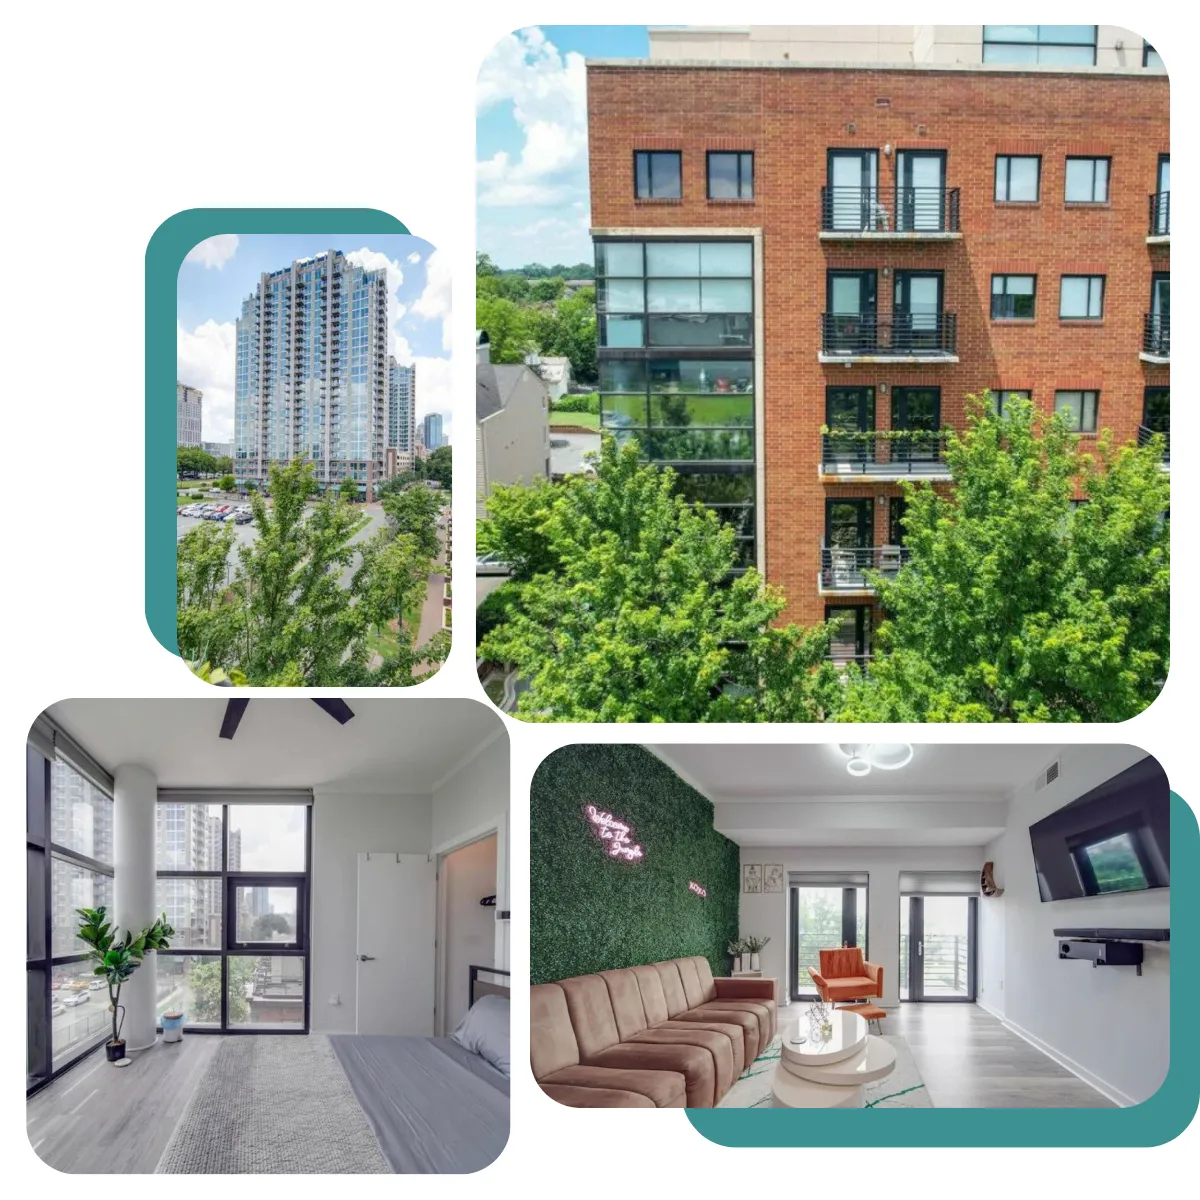 Experience a modern Urban Condo in Uptown Charlotte's lively 4th Ward. Wake up to stunning city views from the 5th floor.